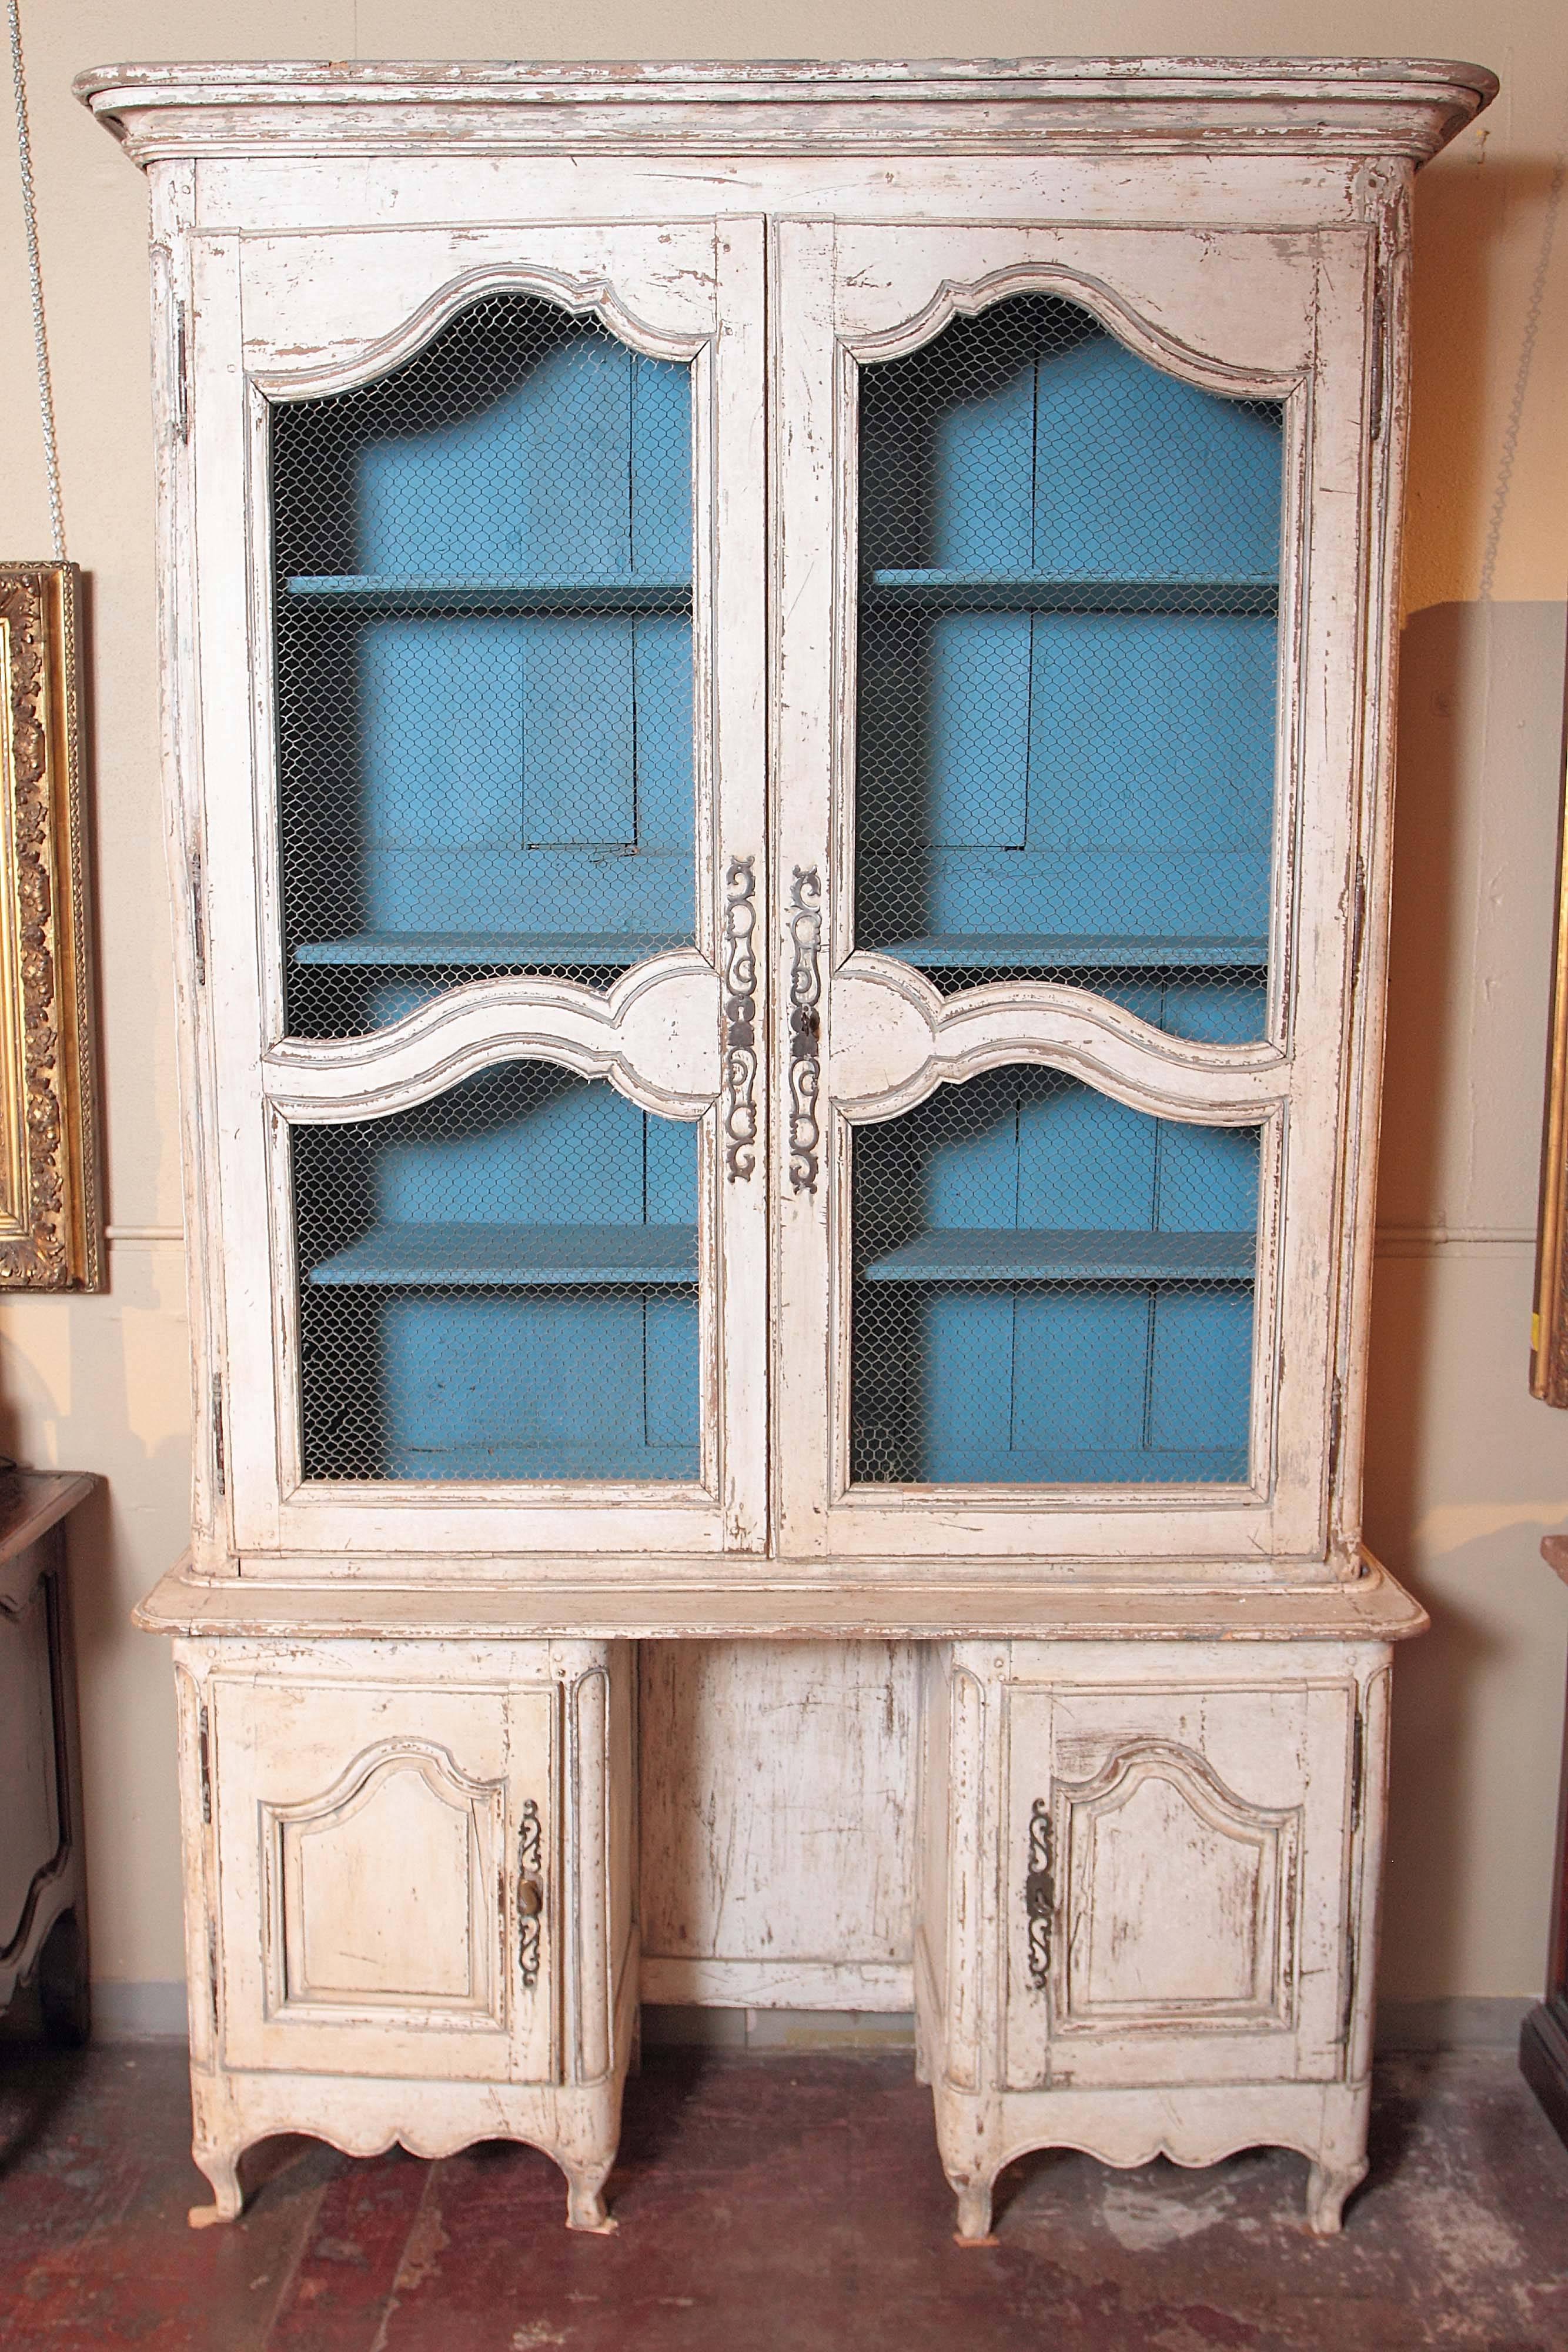 Add more storage and display areas to your home with this elegant, antique painted buffet vitrine. This display cabinet from Southern France, circa 1760, features two large doors on the upper part with adjustable shelving and chicken wire netting